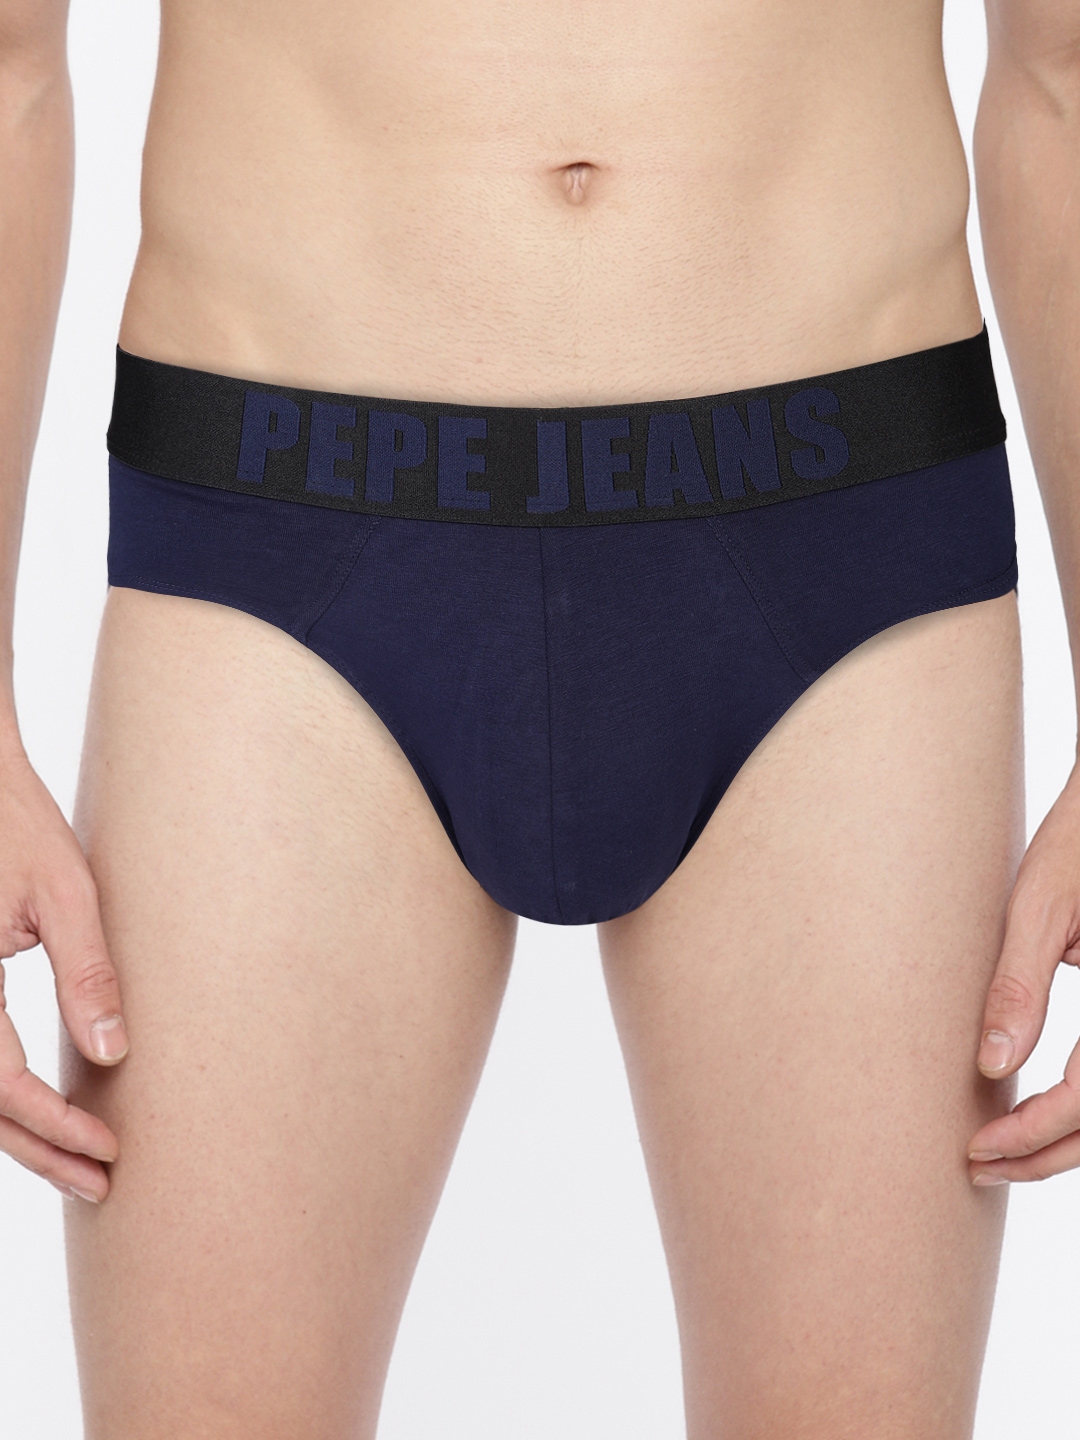 Pepe Jeans Hipster Brief, OPB07